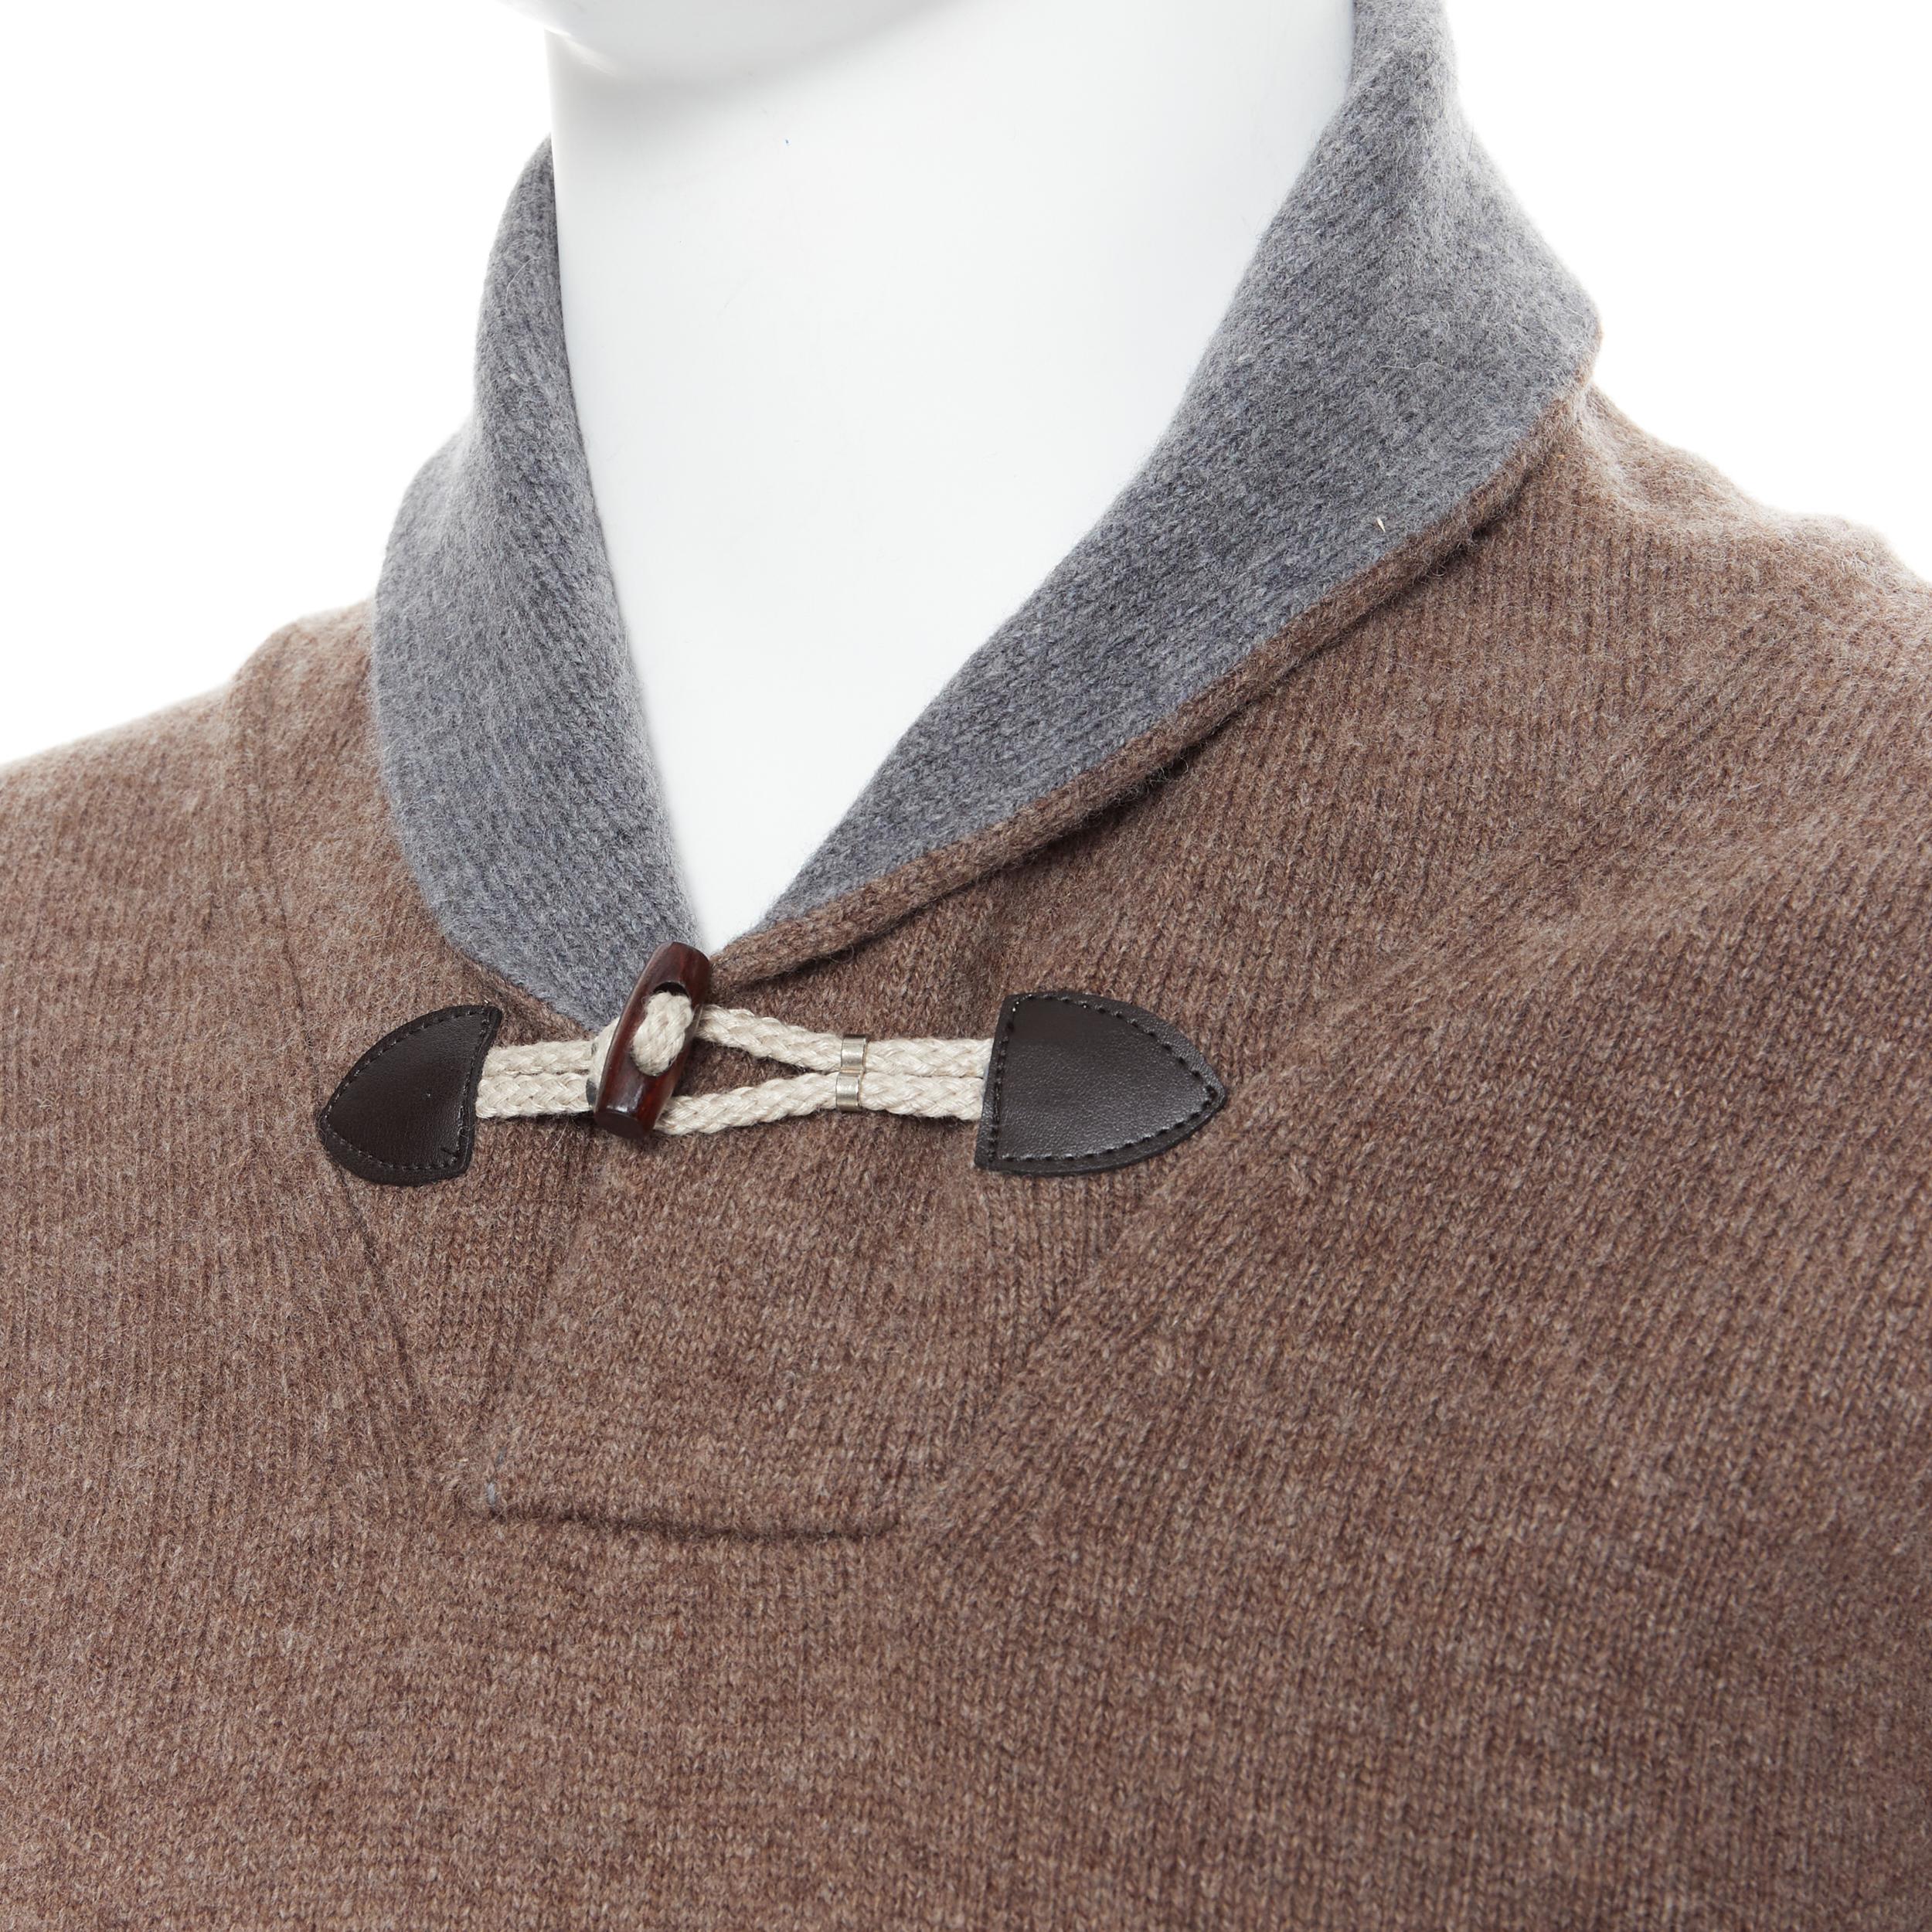 HACKETT Merino Cashmere brown grey shawl collar toggle pullover sweater XS 
Reference: PRCN/A00081 
Brand: Hackett 
Material: Wool 
Color: Brown 
Pattern: Solid 
Closure: Toggle 
Extra Detail: Merino Cashmere. Taupe brown upper. Grey shawl collar.